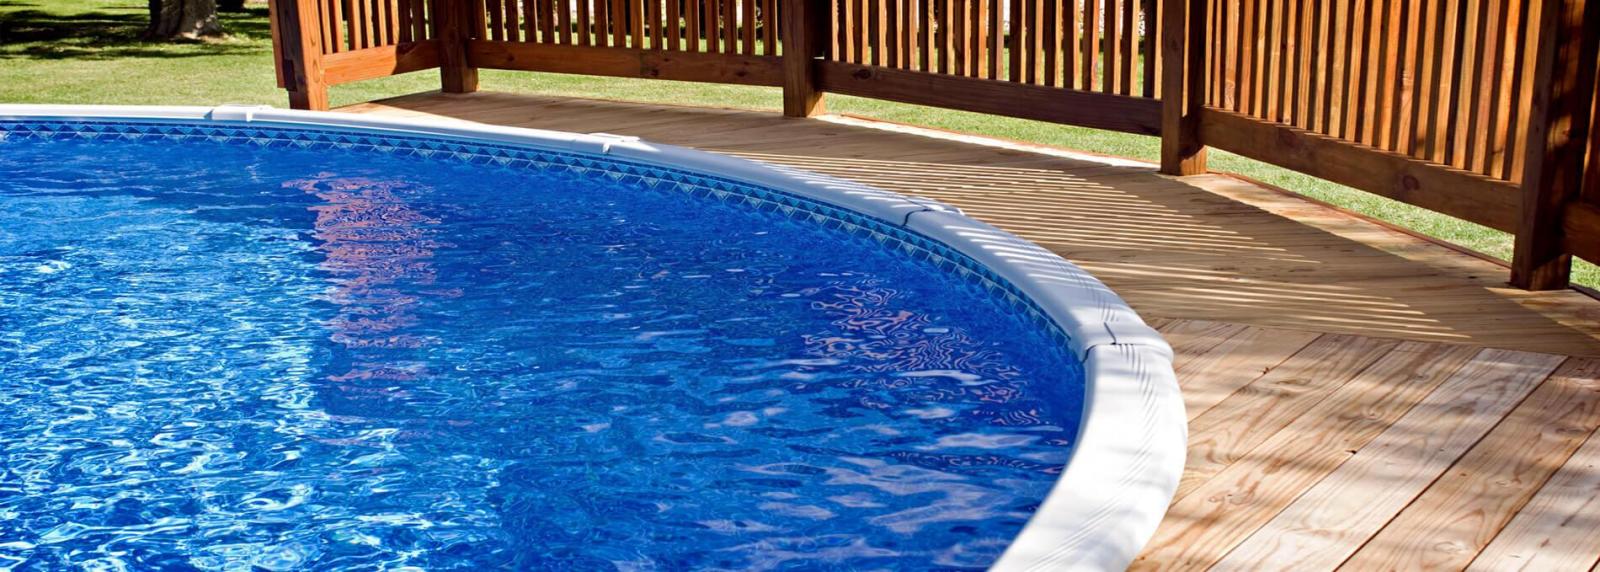 above-ground-pool-liner-changes-chatham-kent-ontario